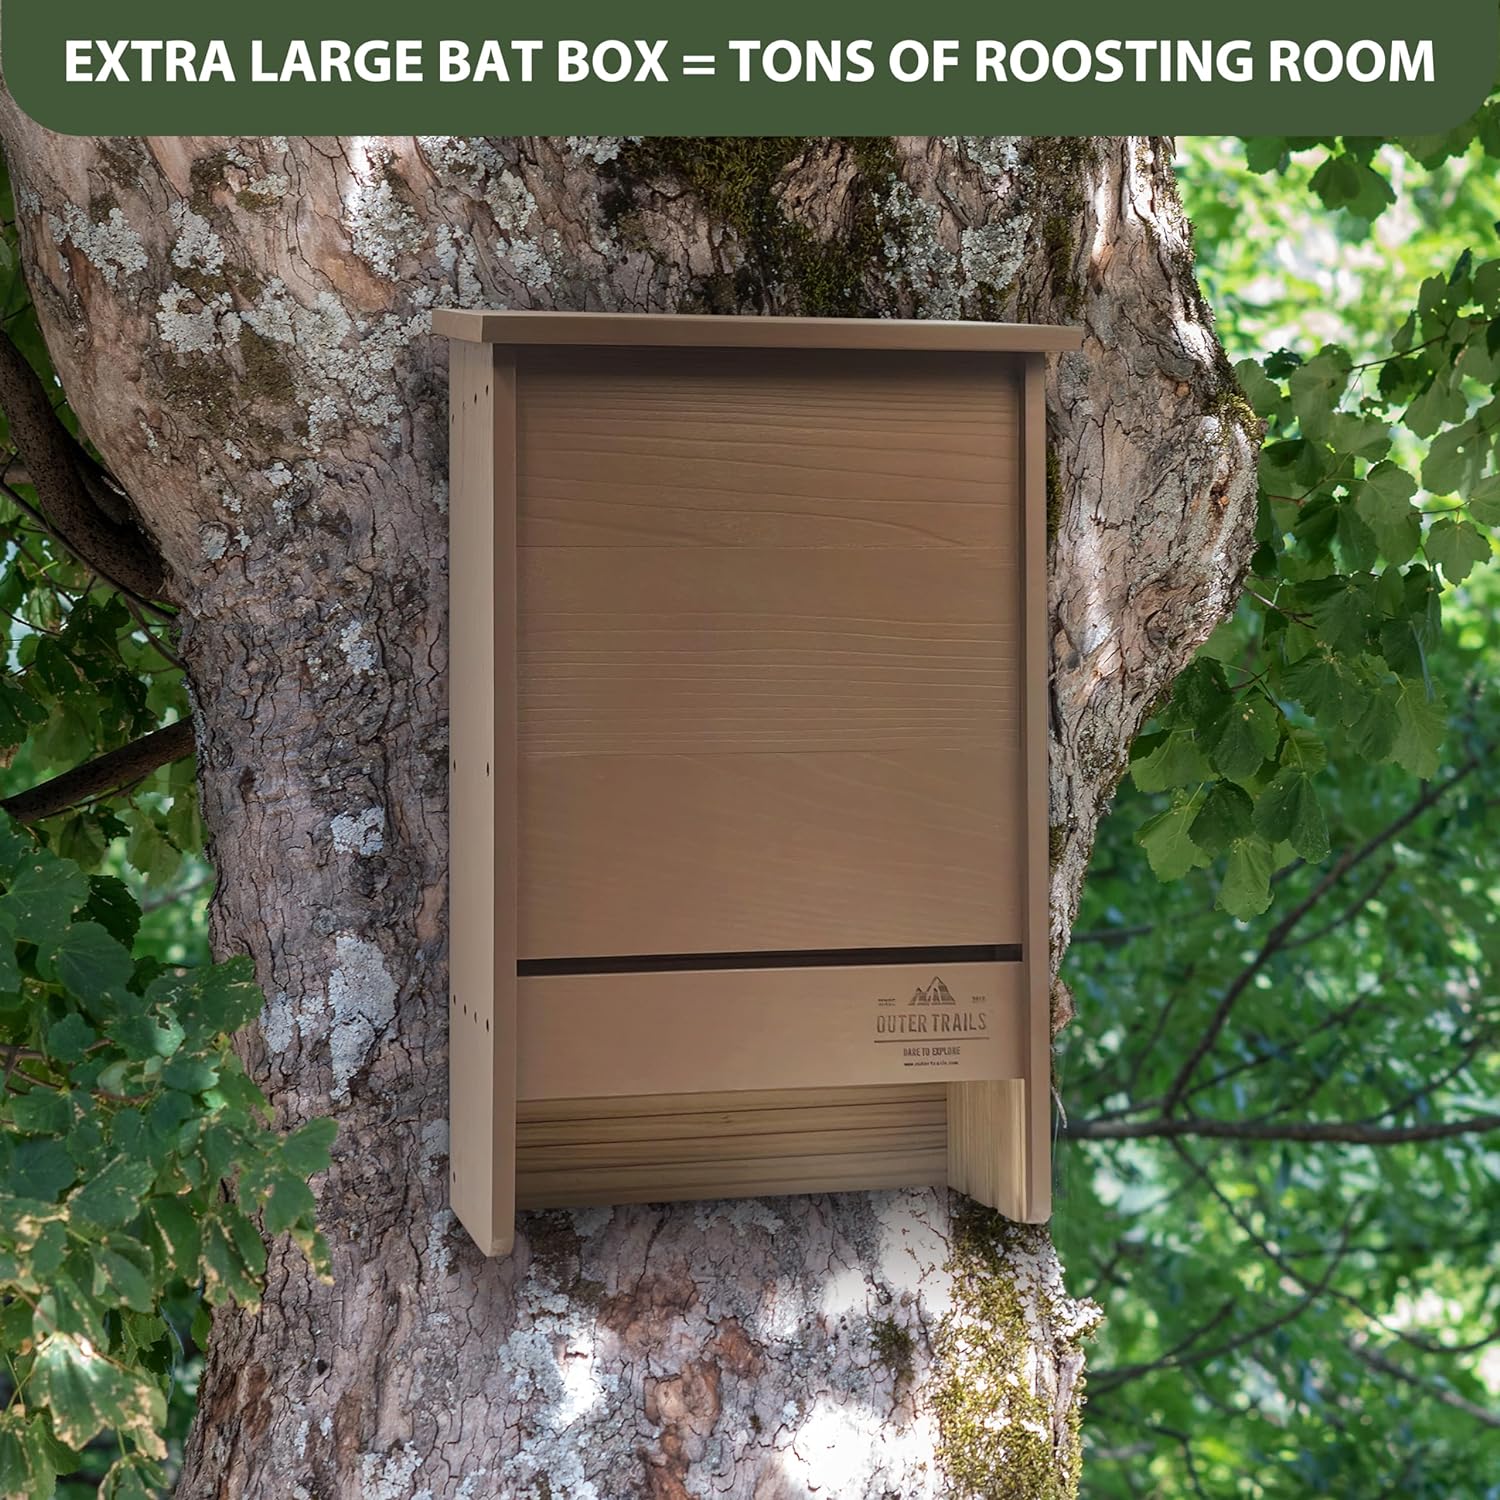 Showcase of the Outer Trails™ bat house providing ample space for bat roosting, mounted on a tree in a natural setting